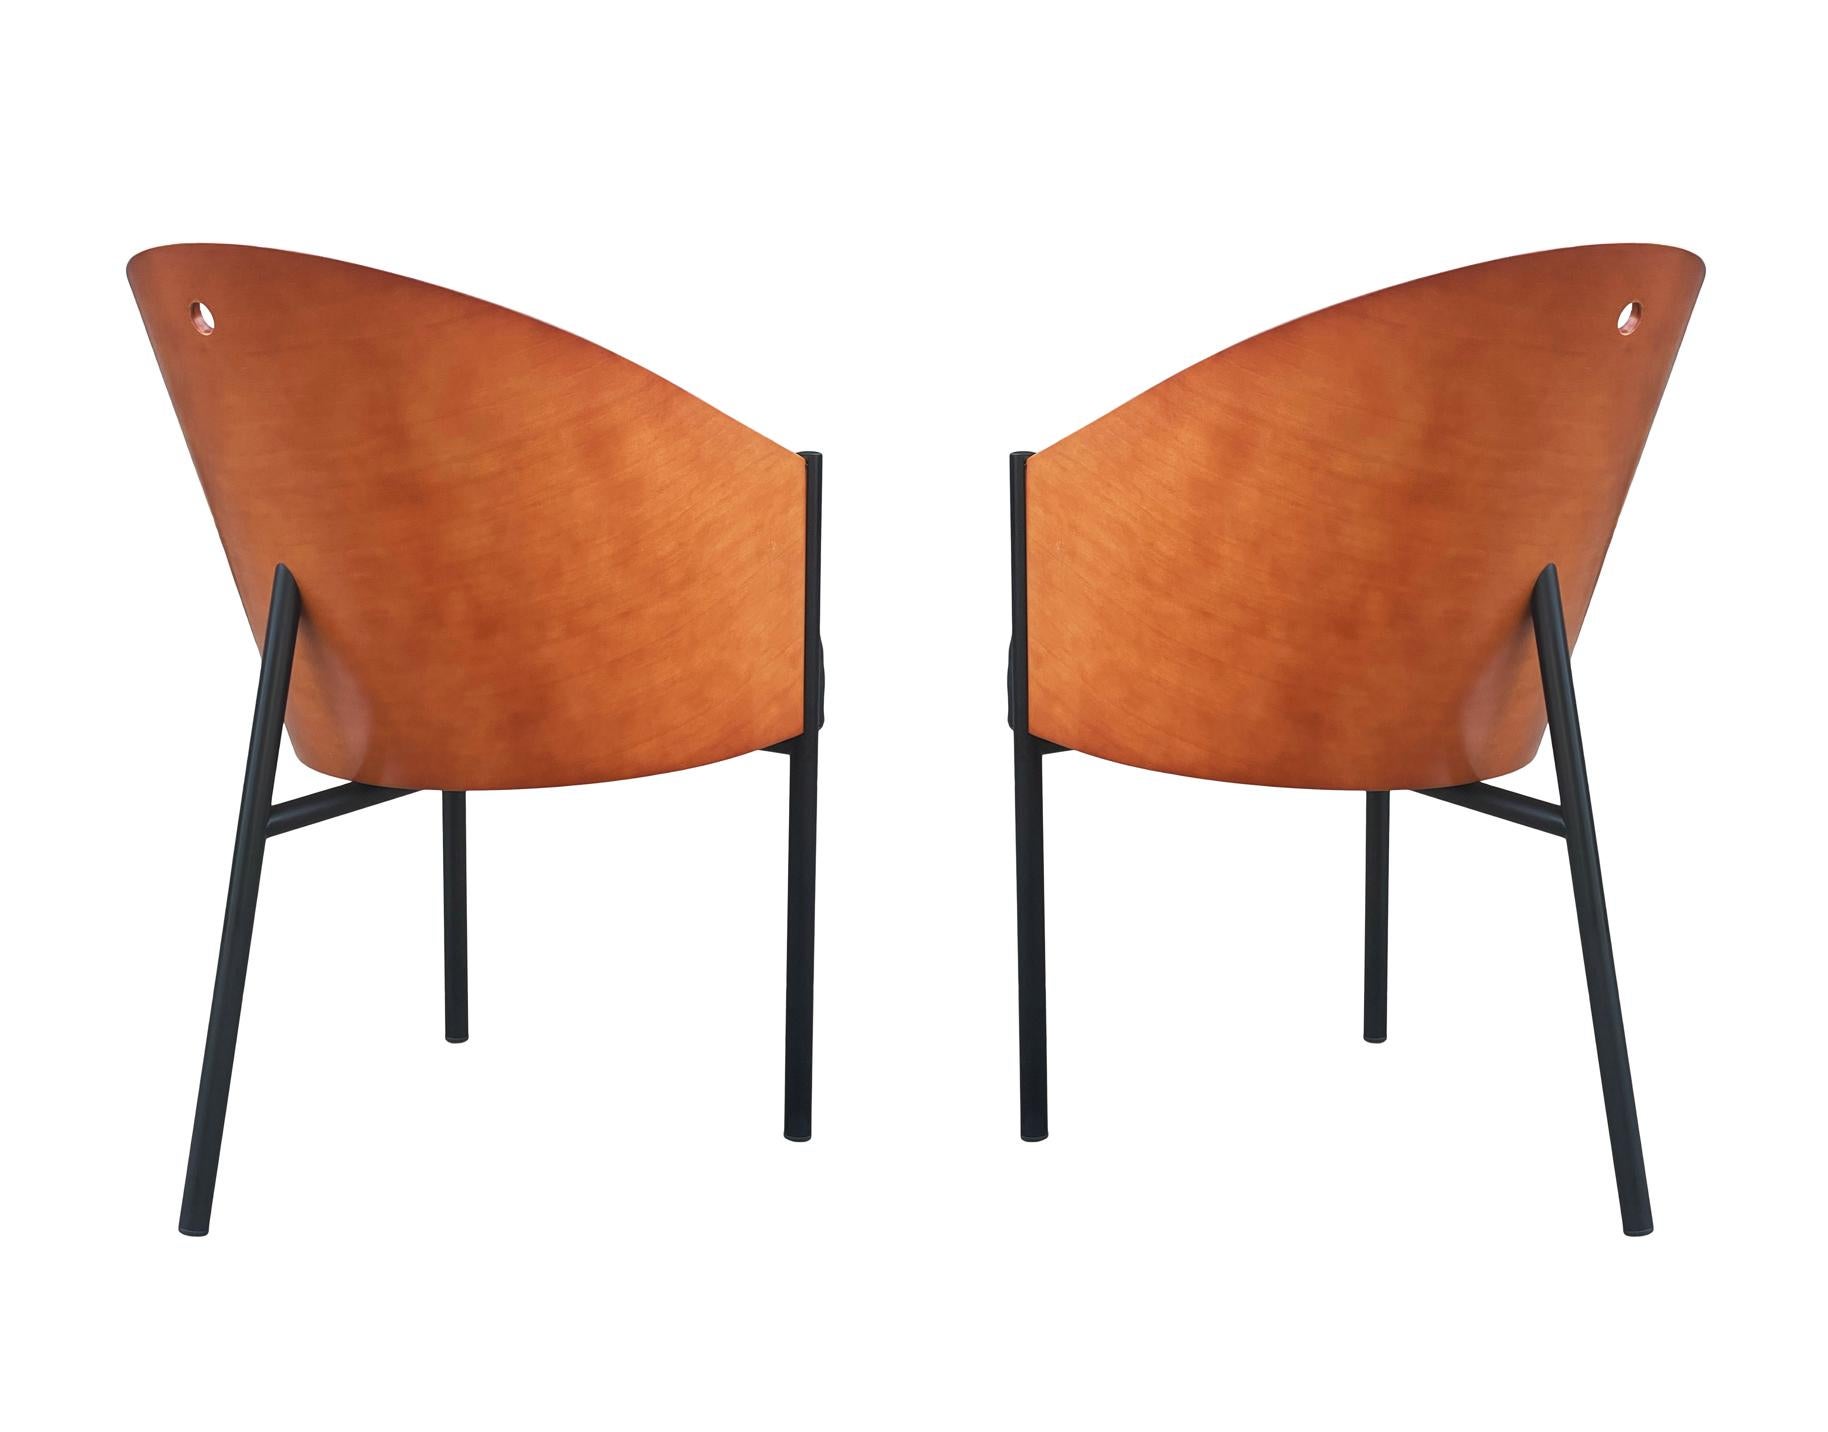 Late 20th Century Set of Four Mid-Century Modern Dining Chairs by Philippe Starck for Driade For Sale